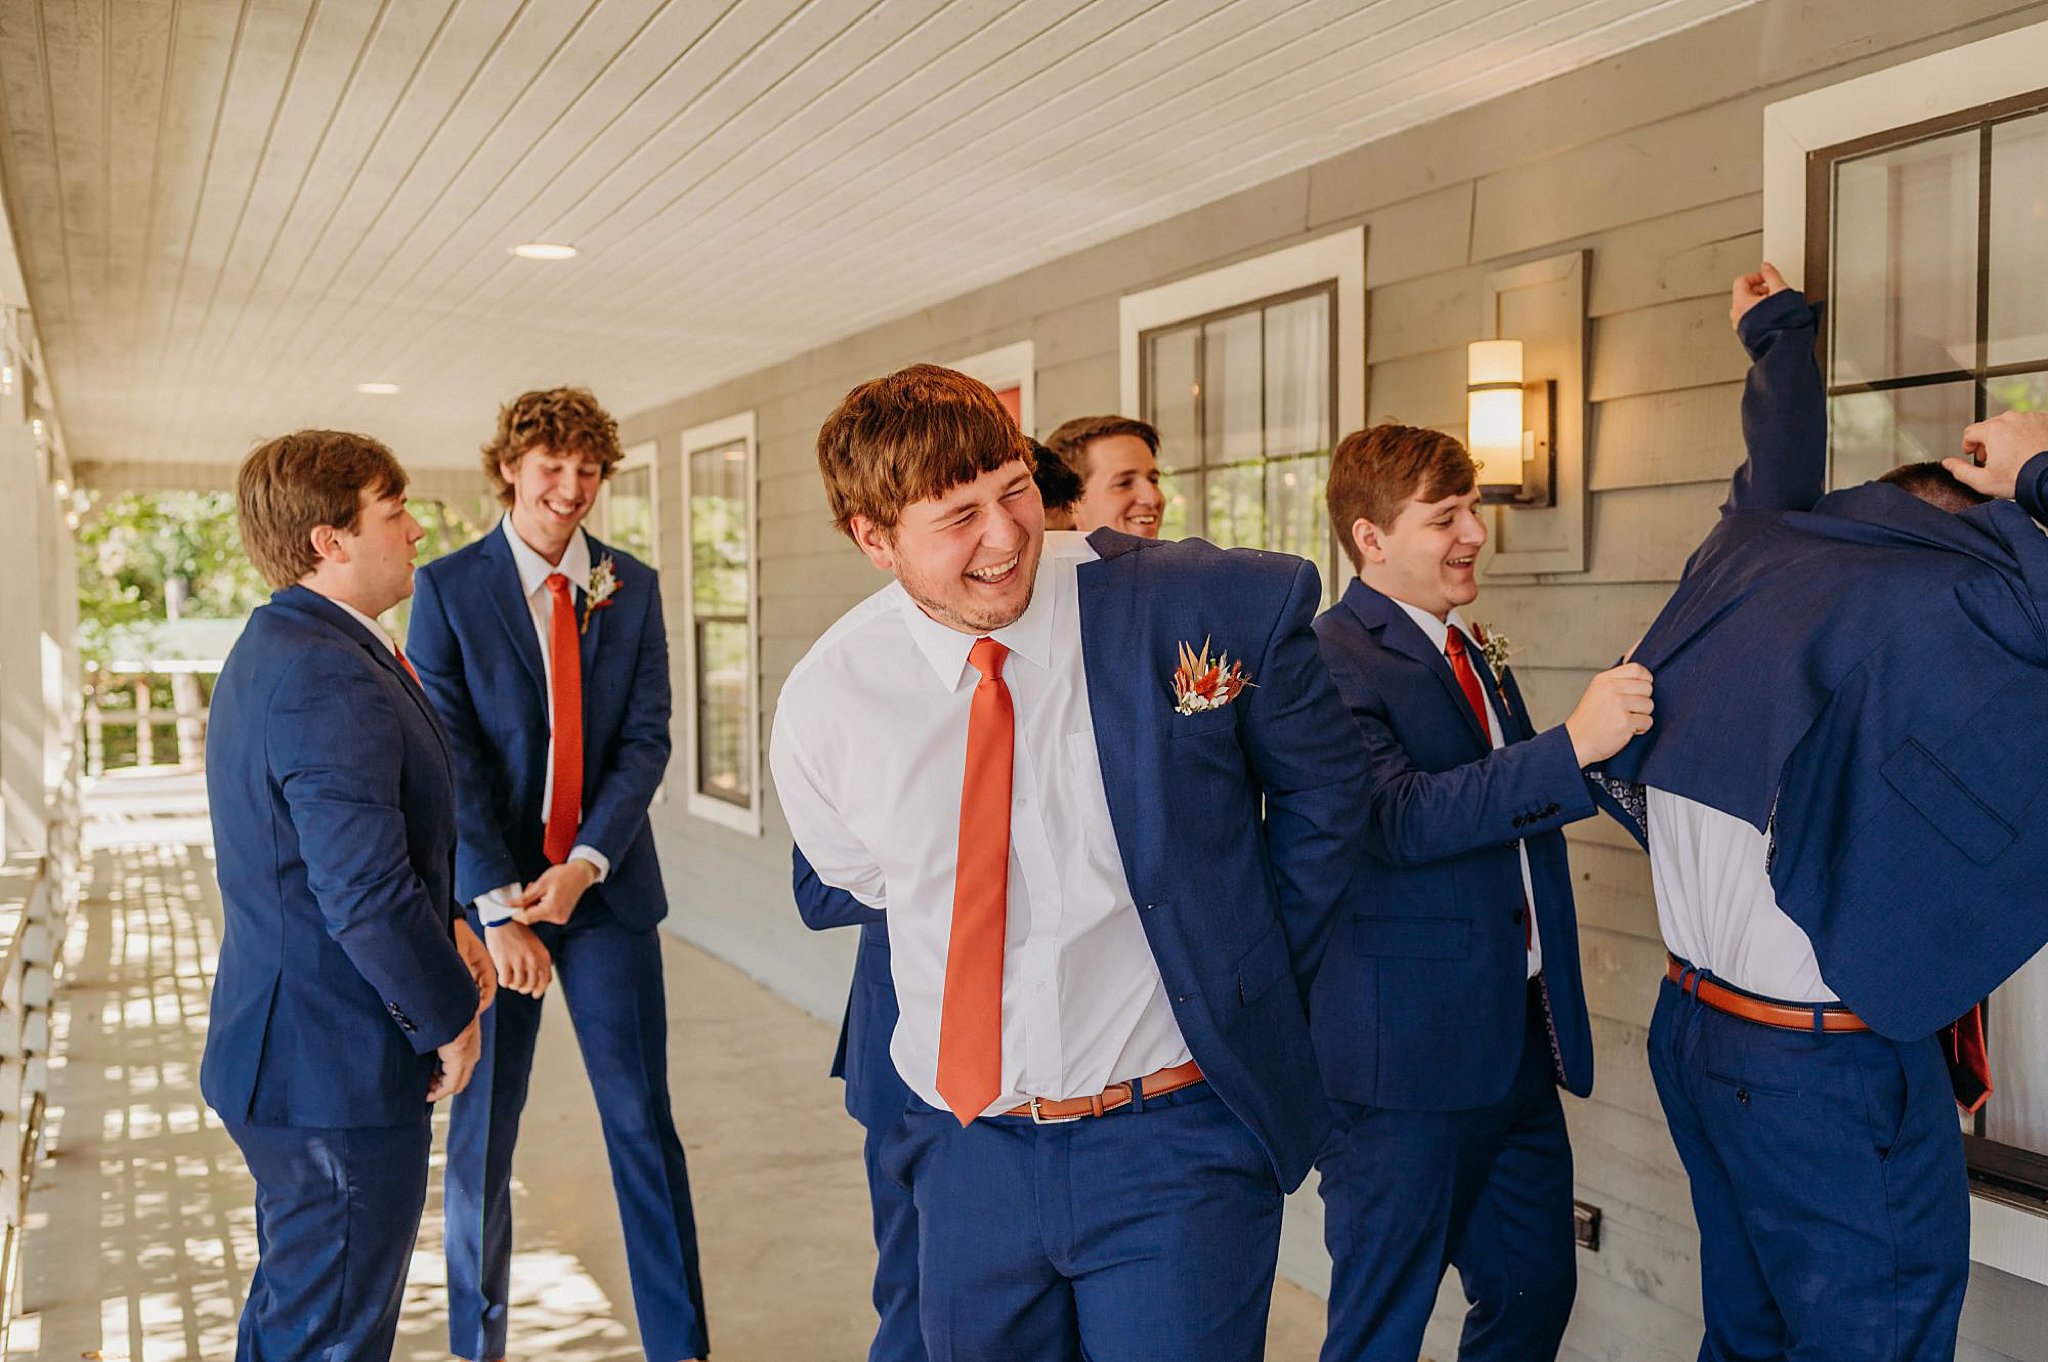 groomsmen putting on navy suits and laughing on a porch